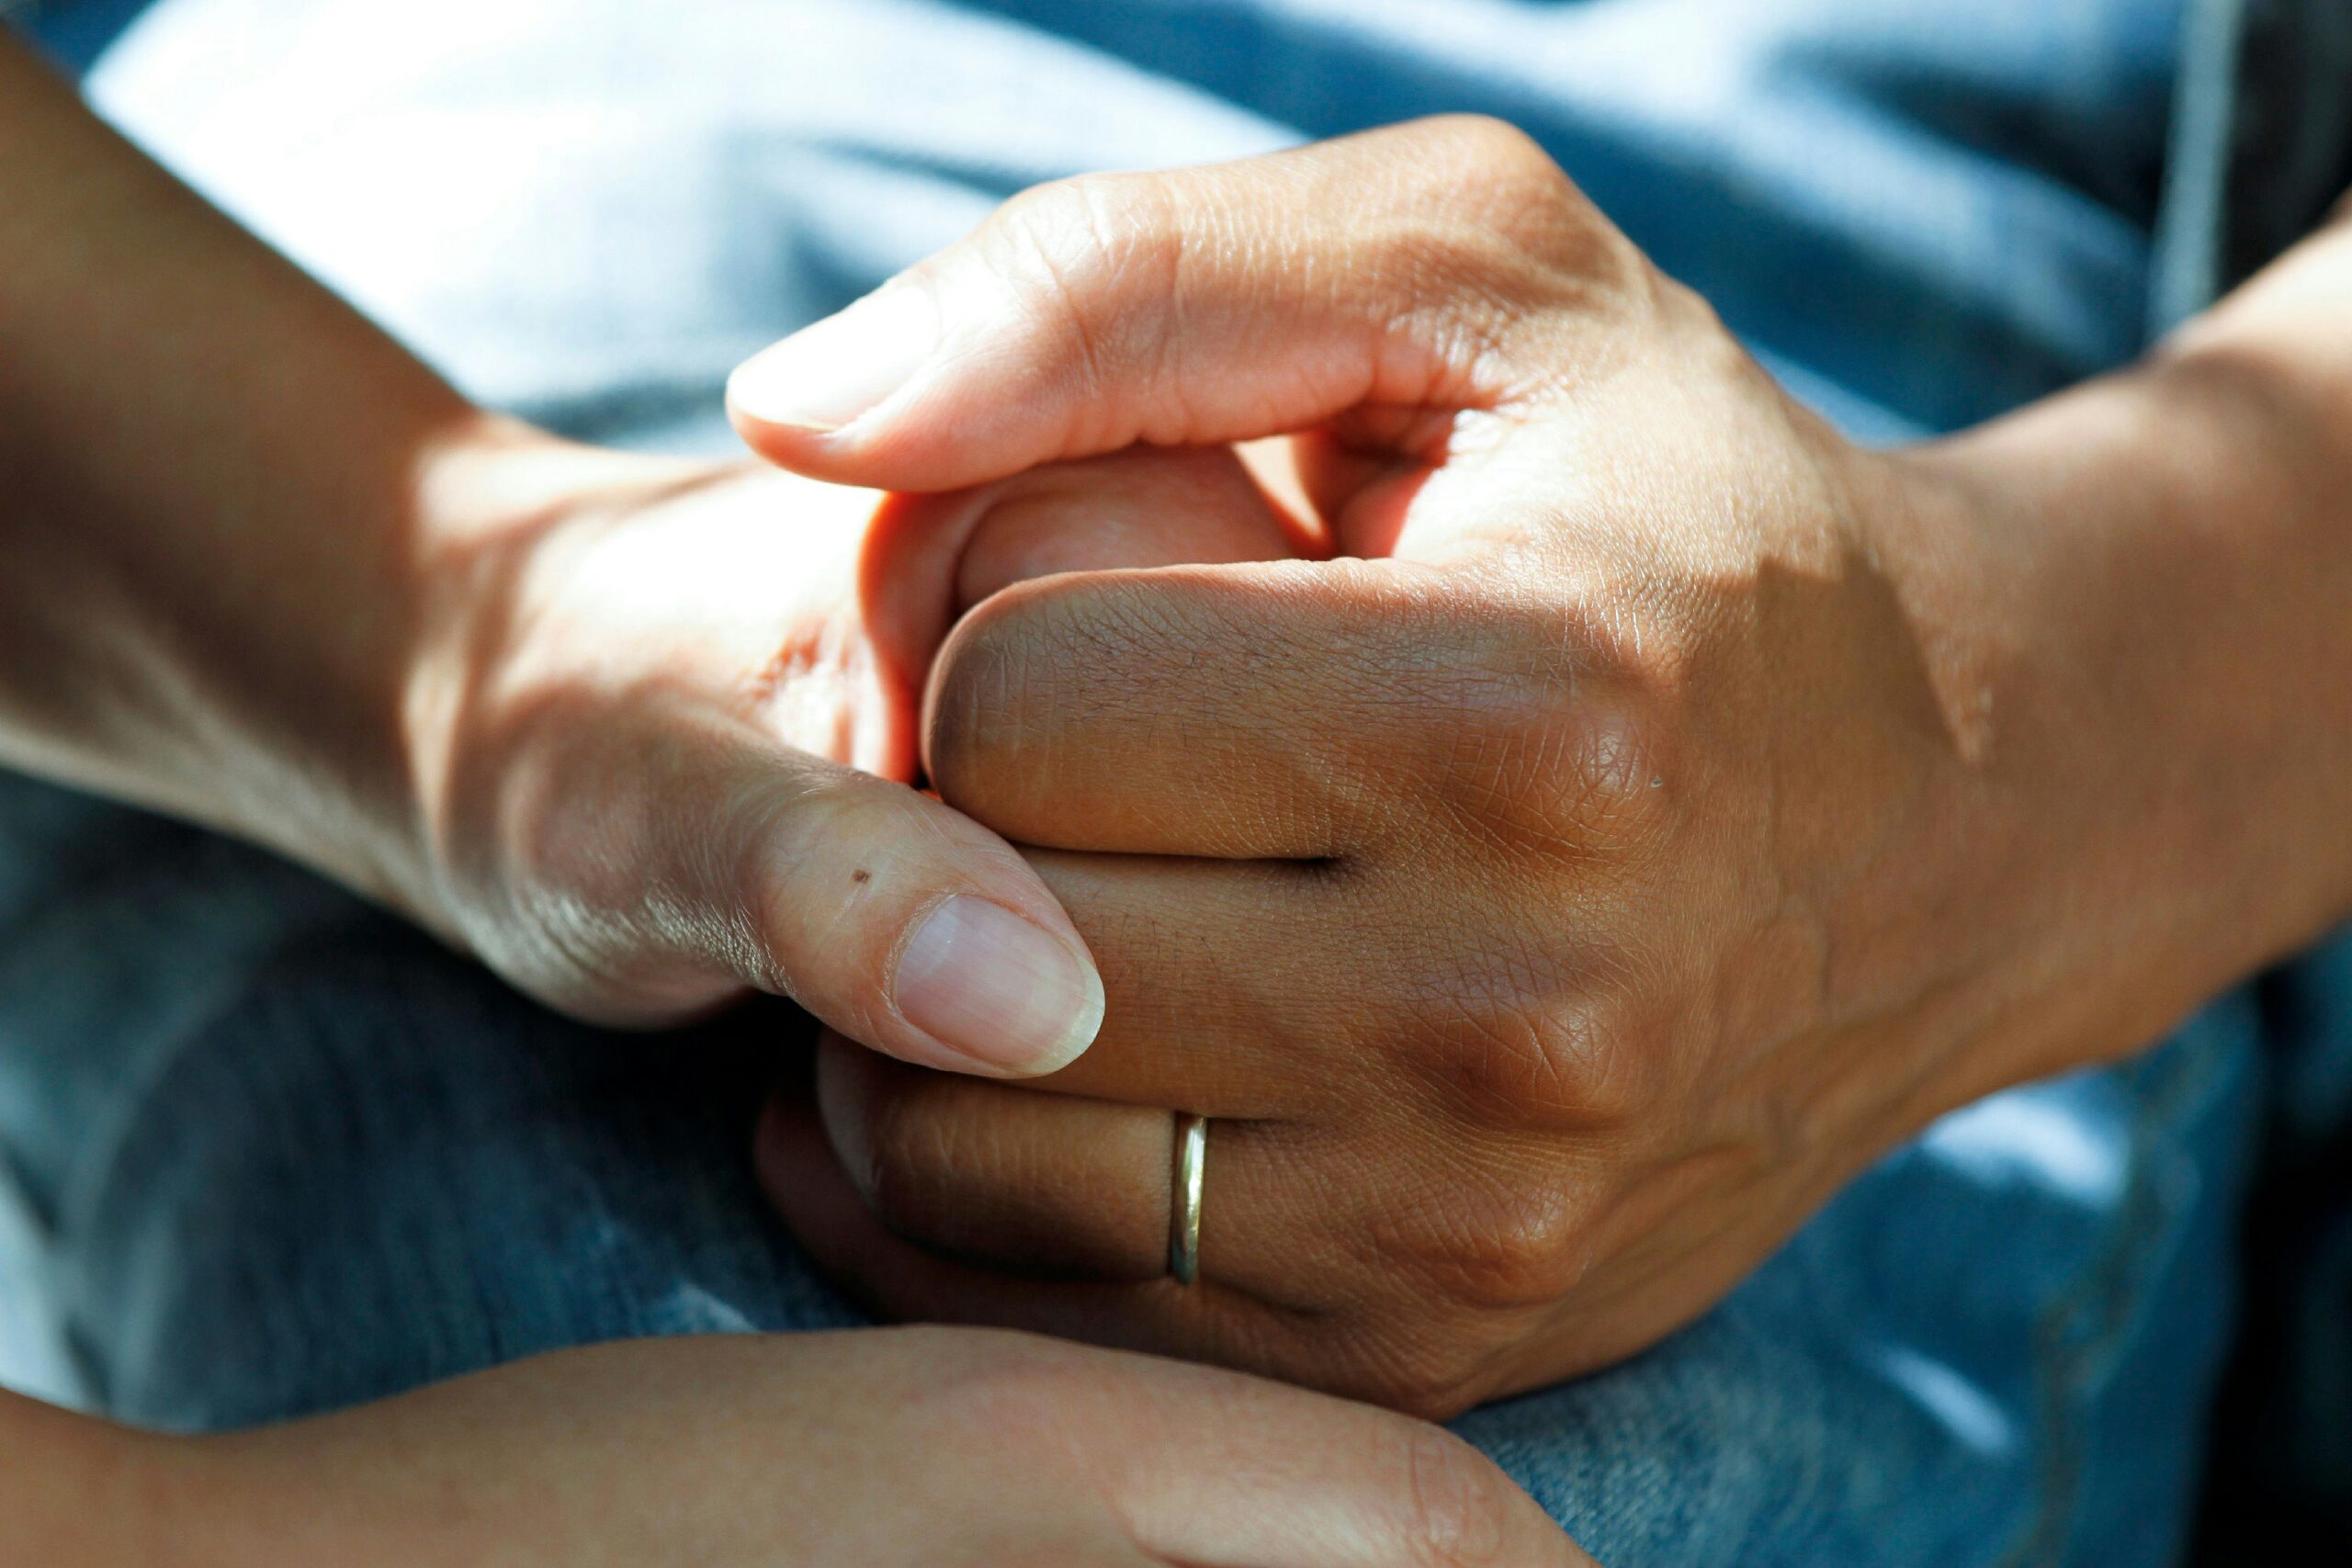 Two individuals clasping hands. One hand has a wedding band.